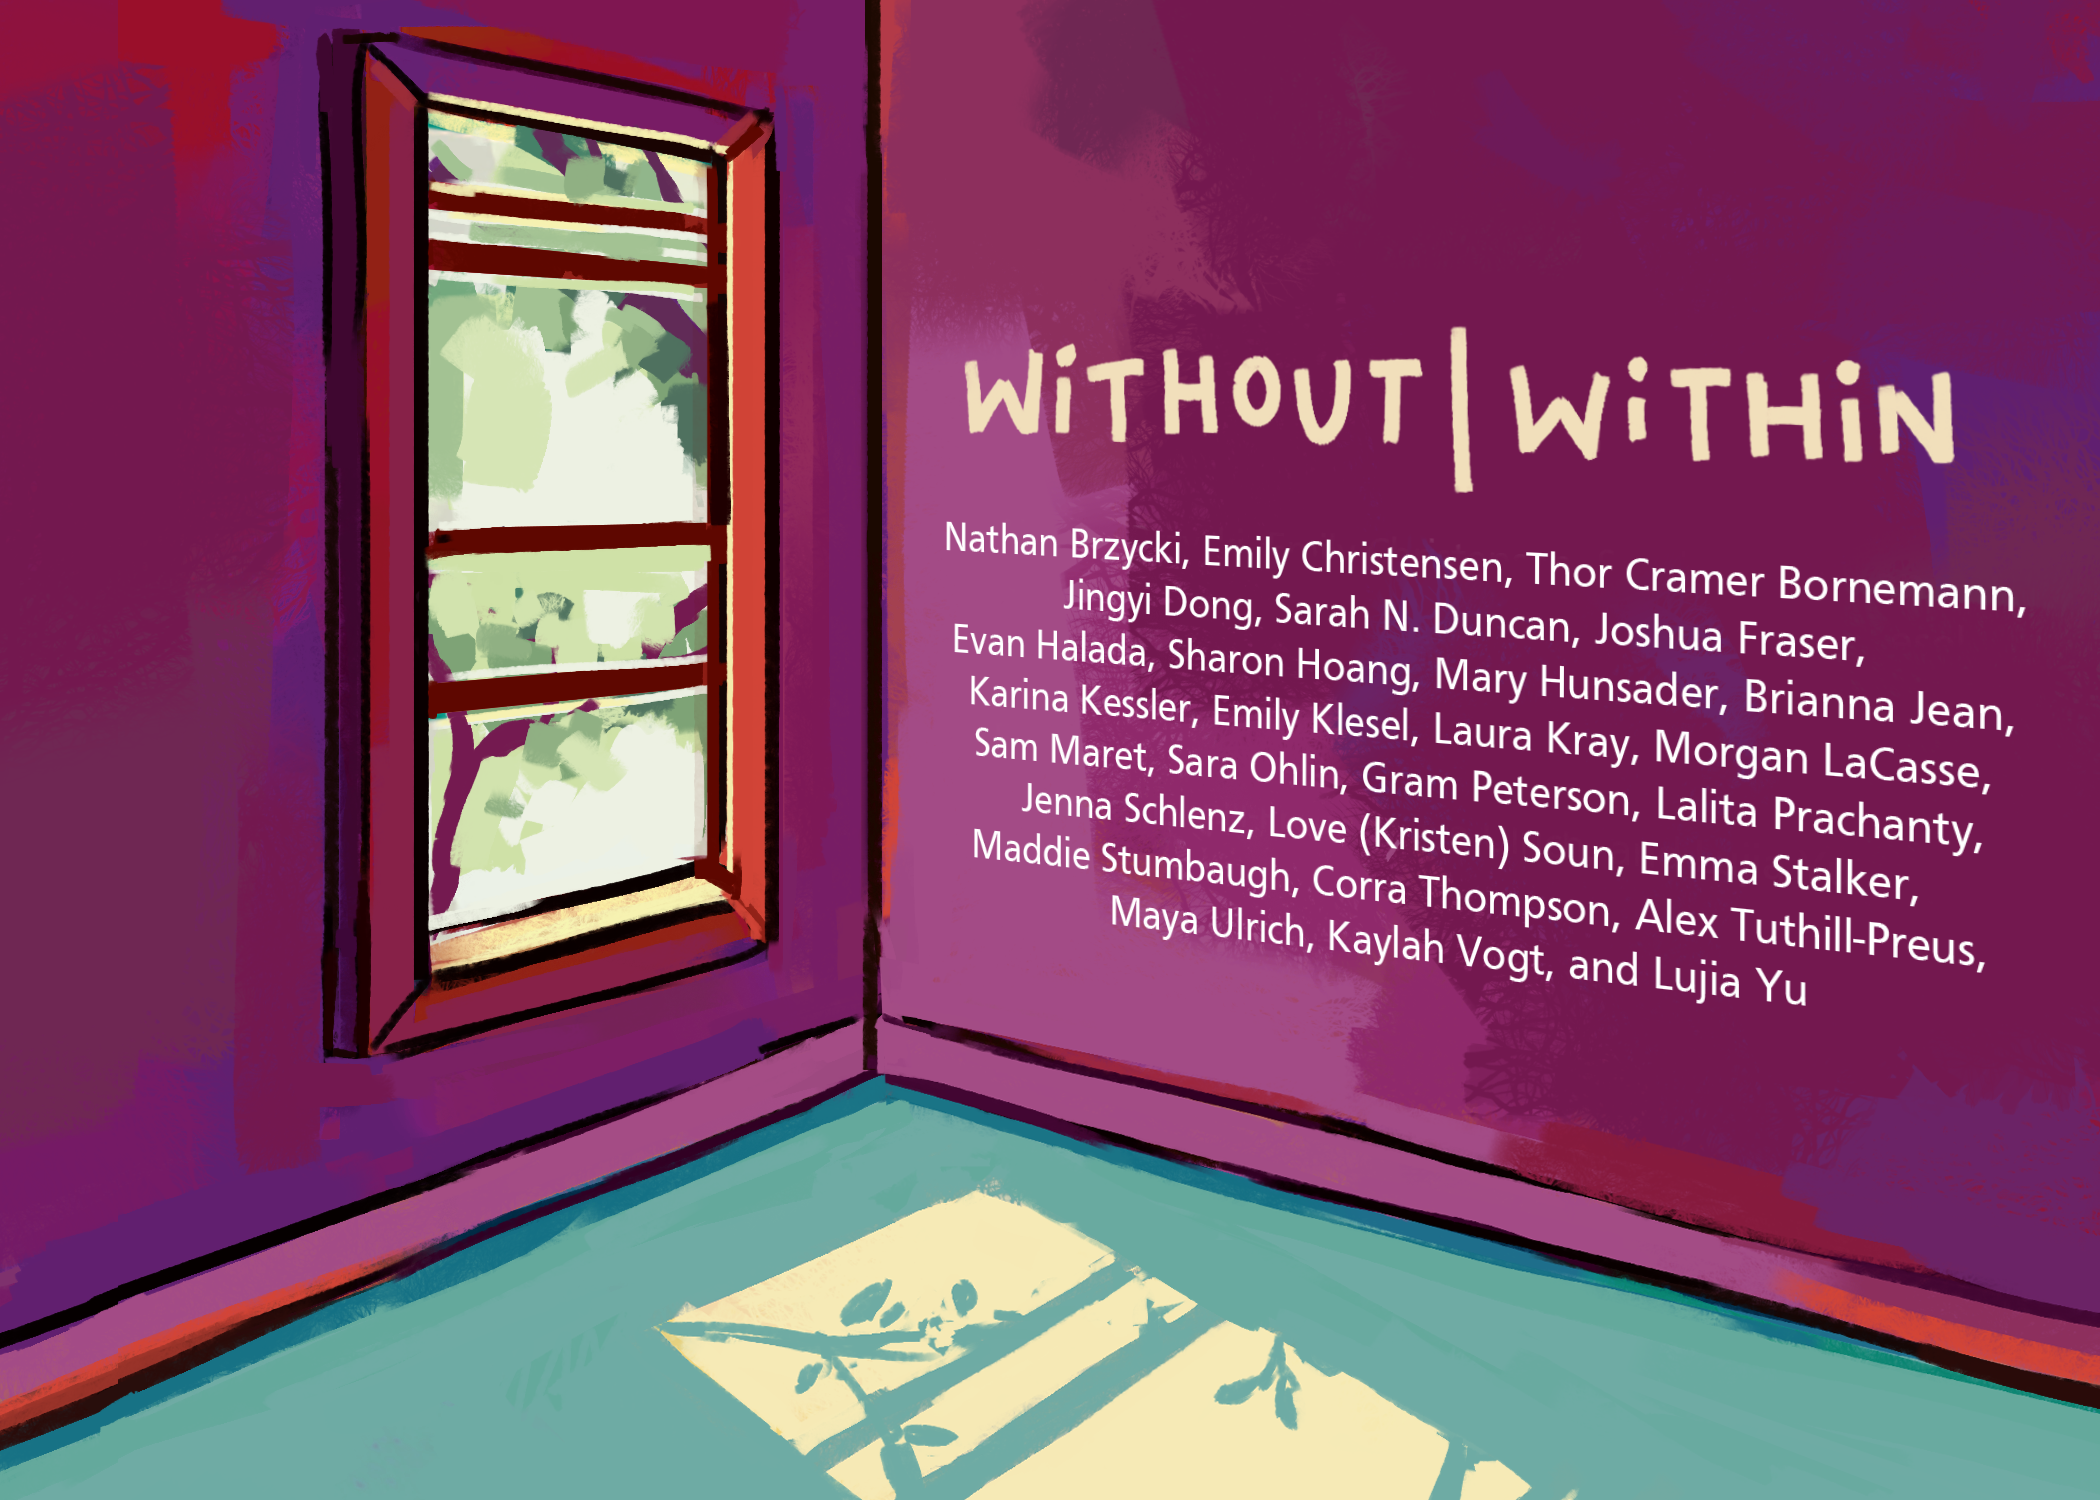 Graphic illustration of the interior of a room with on window with the title "Without|Within" on a wall of the room.